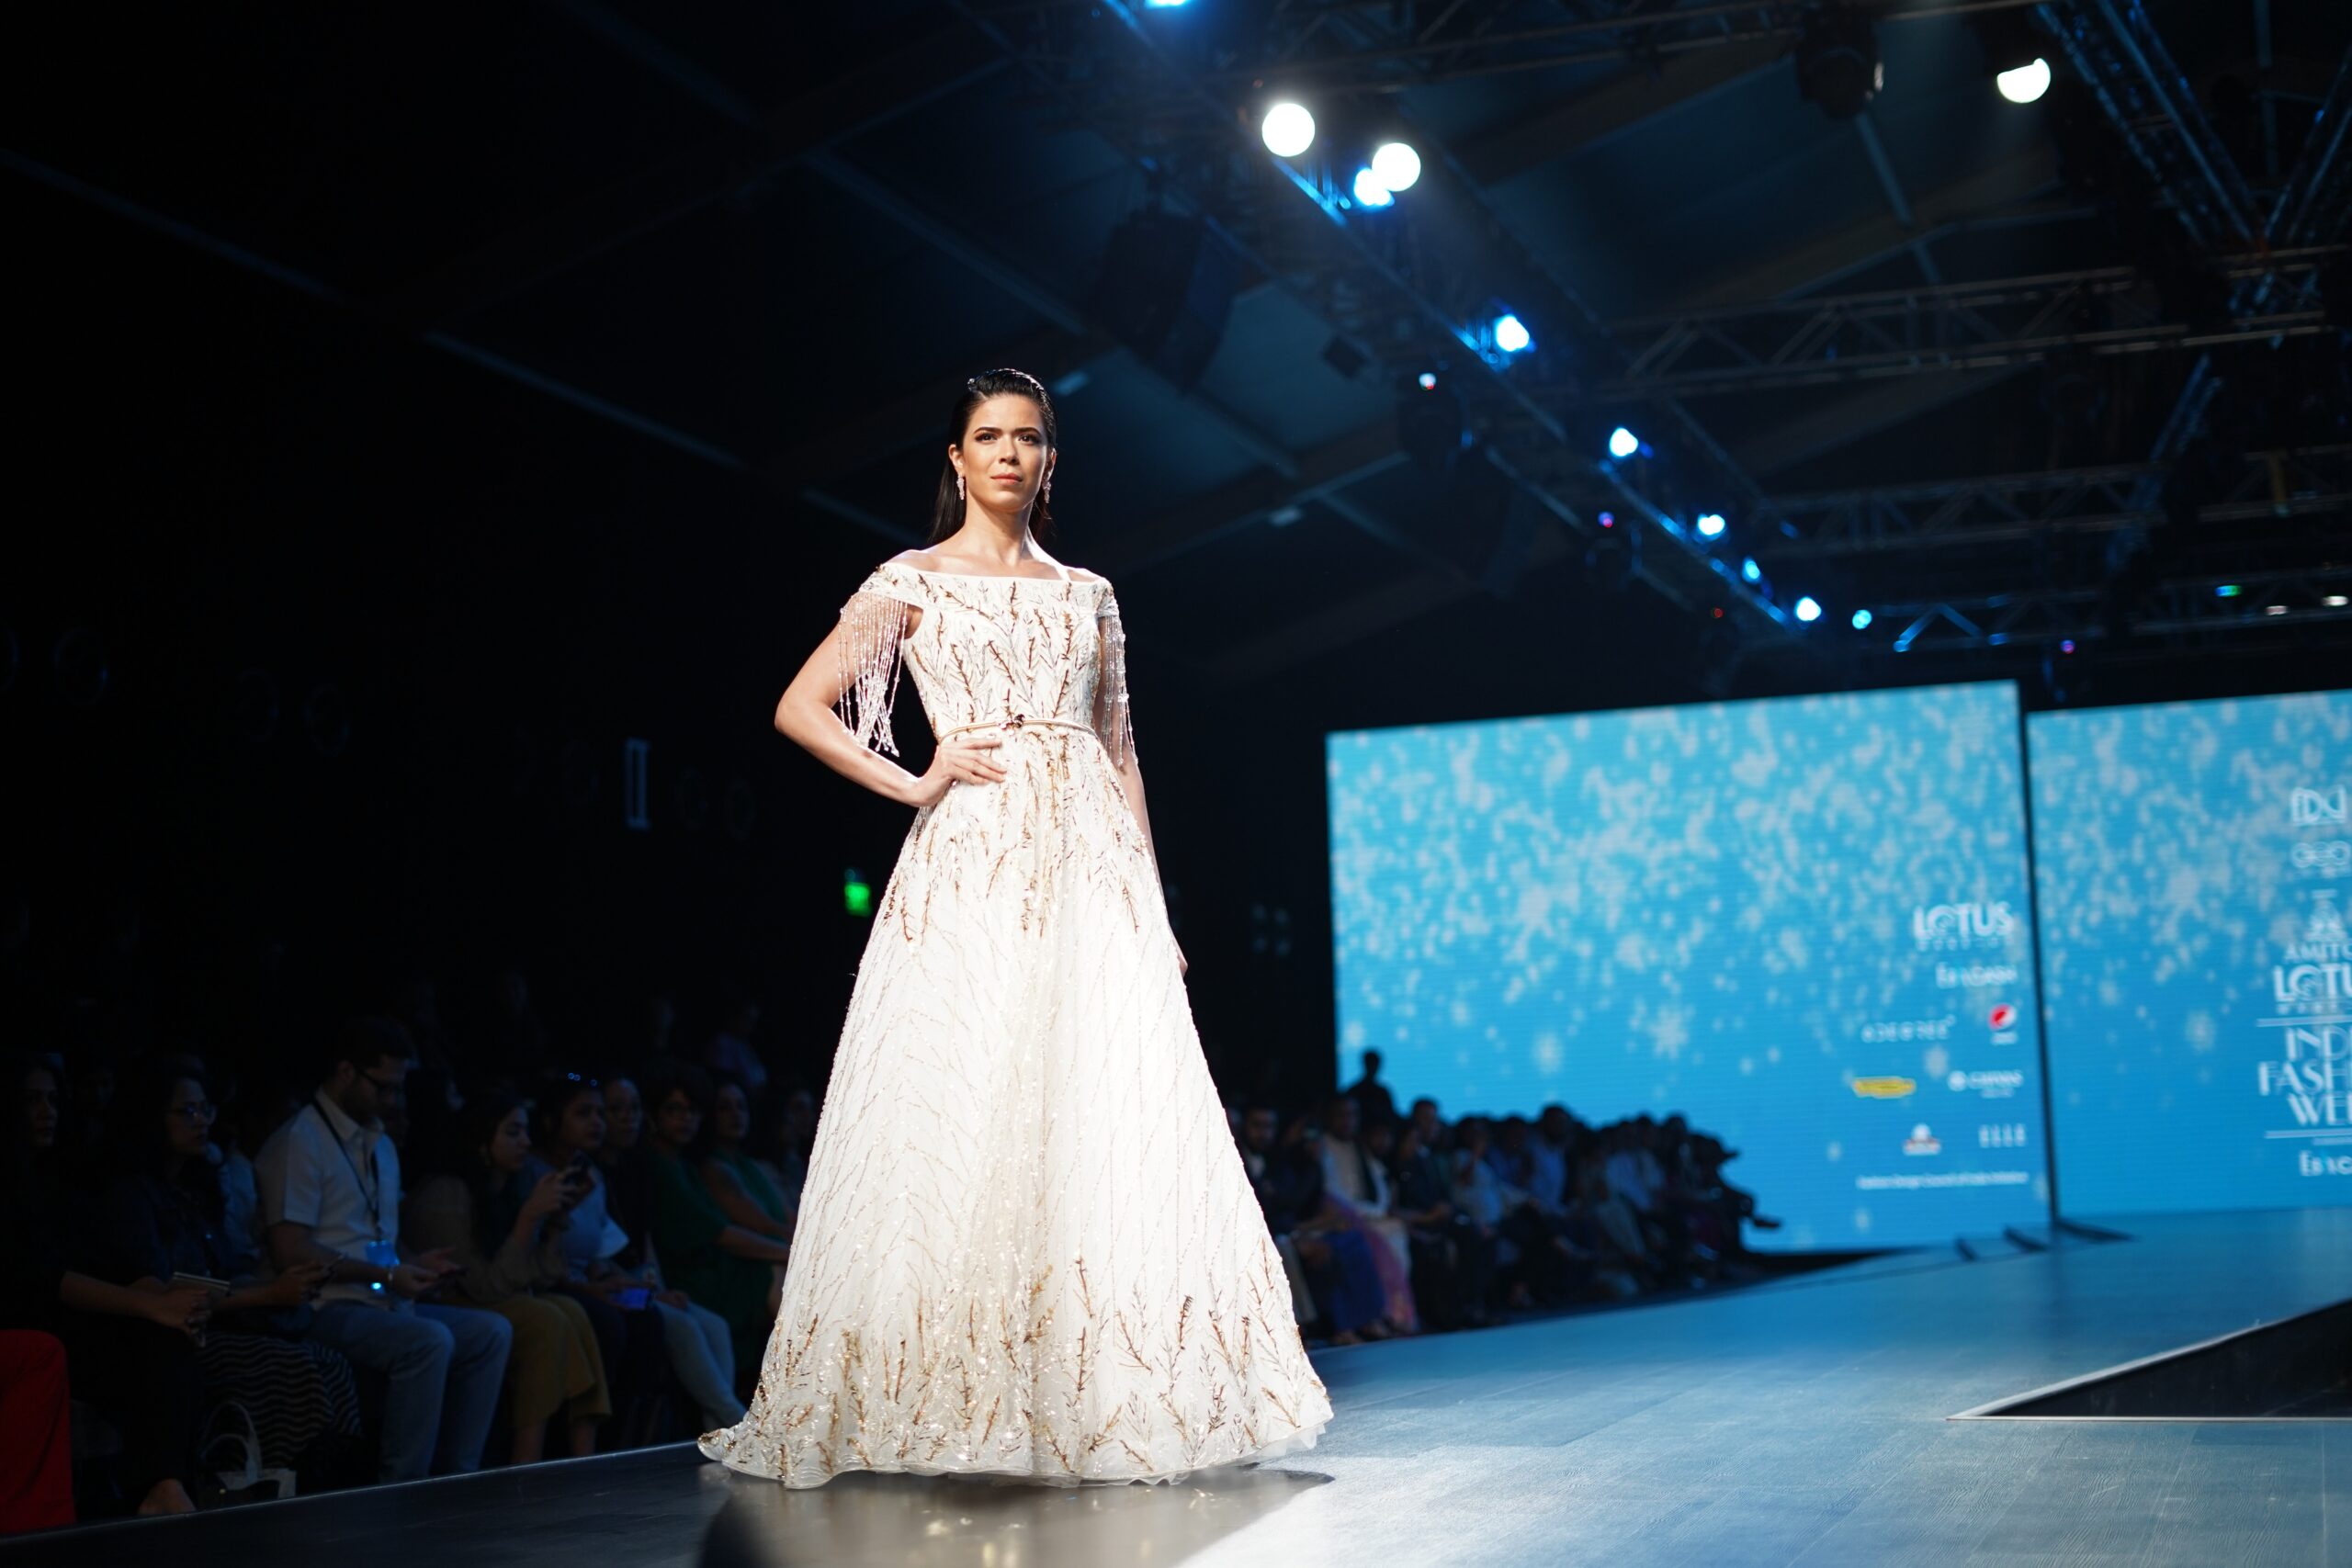 Immerse Yourself in Creativity: Experiencing Artistic Expression at Tel Aviv Fashion Week